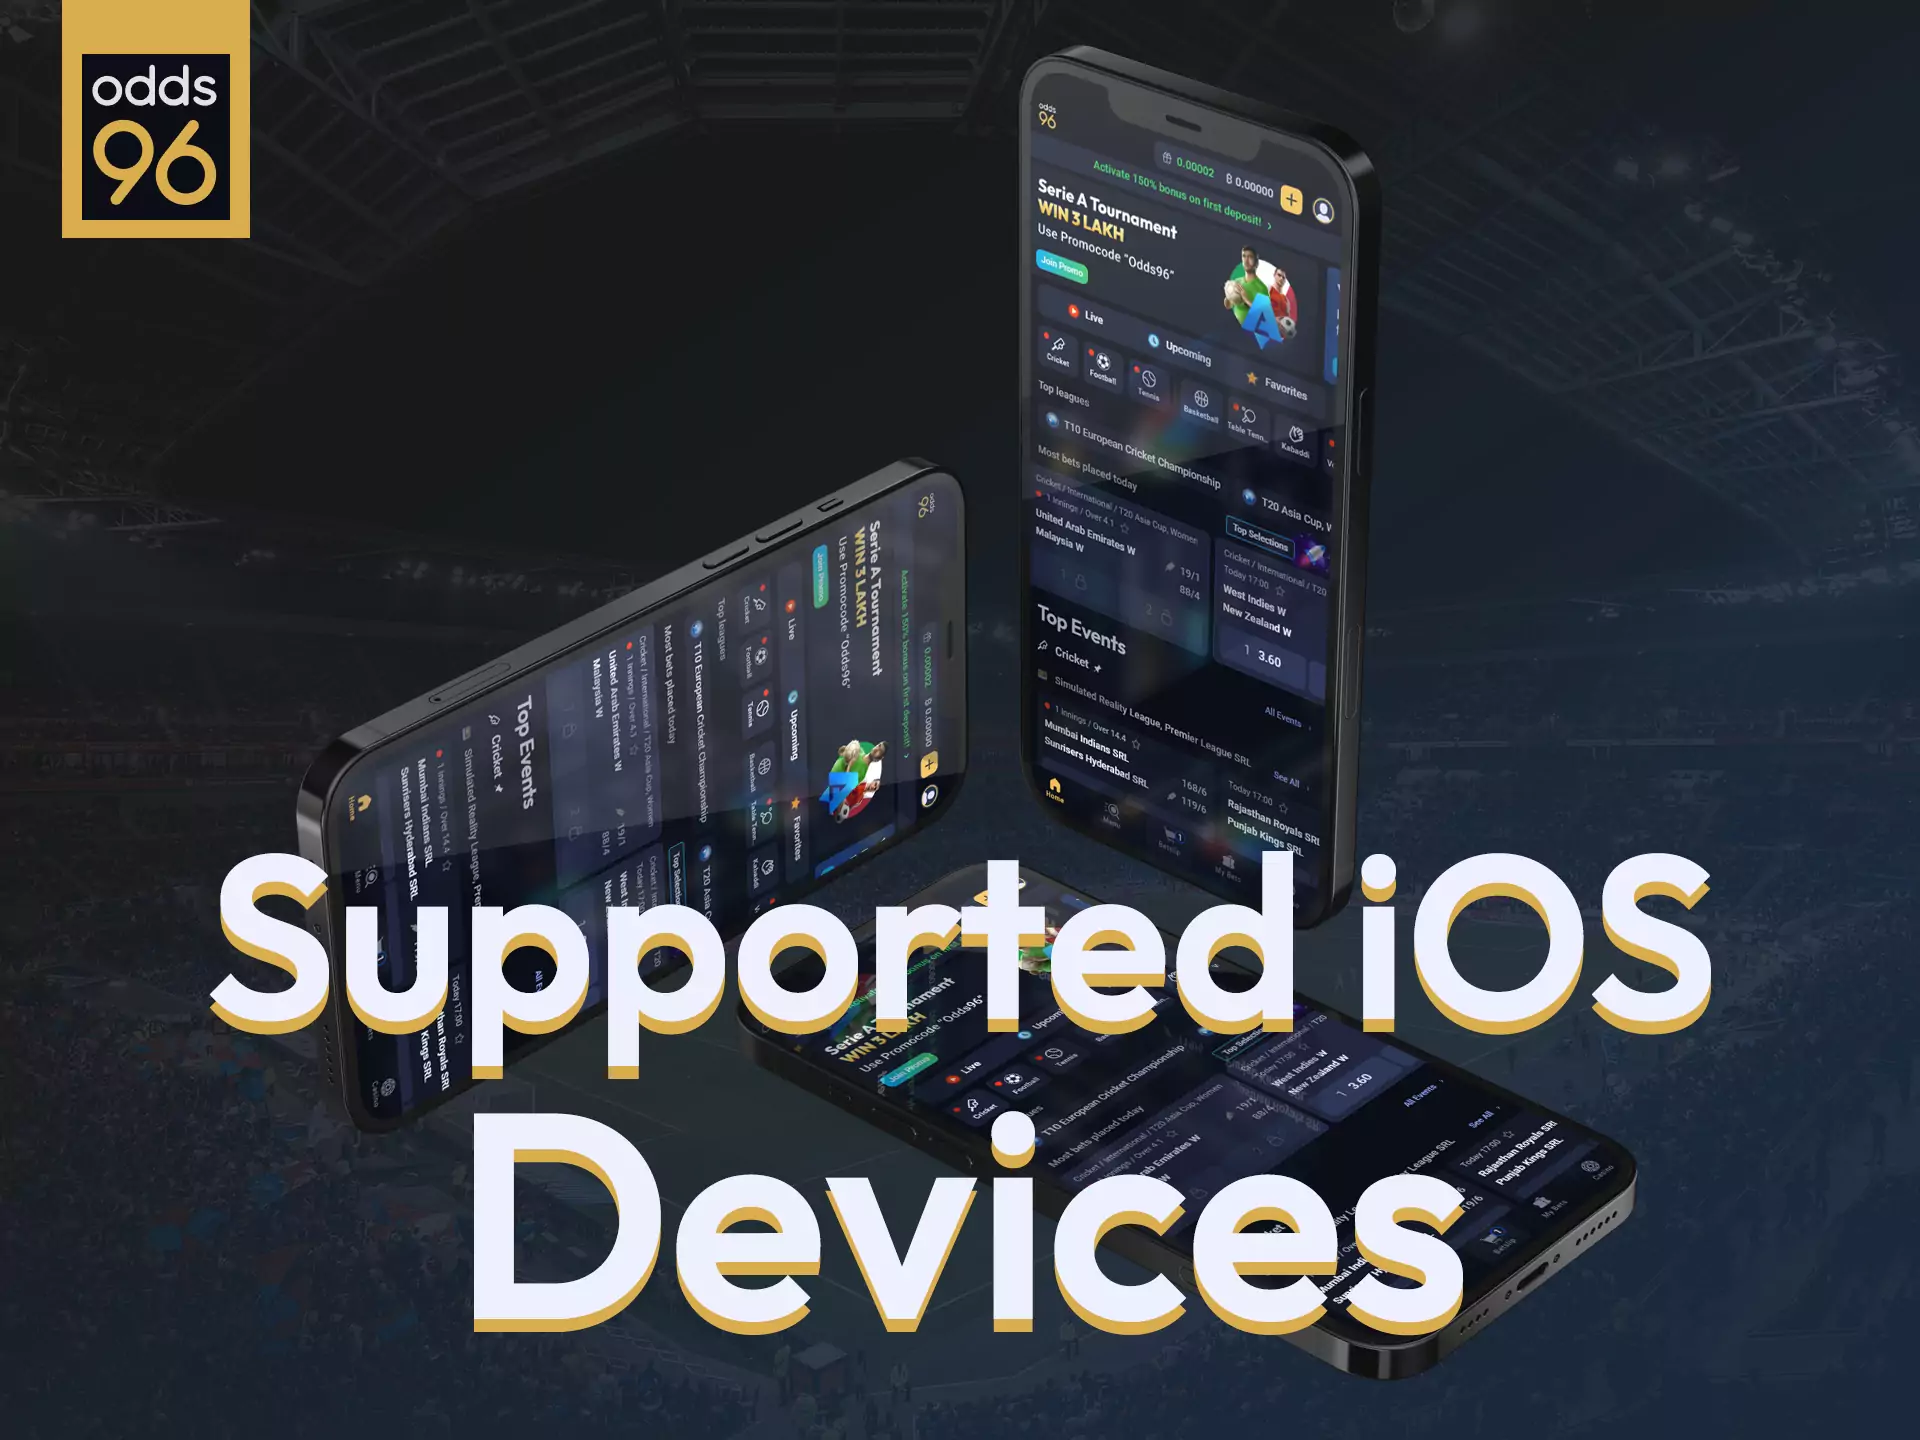 The Odds96 app is supported on a variety of iOS devices.